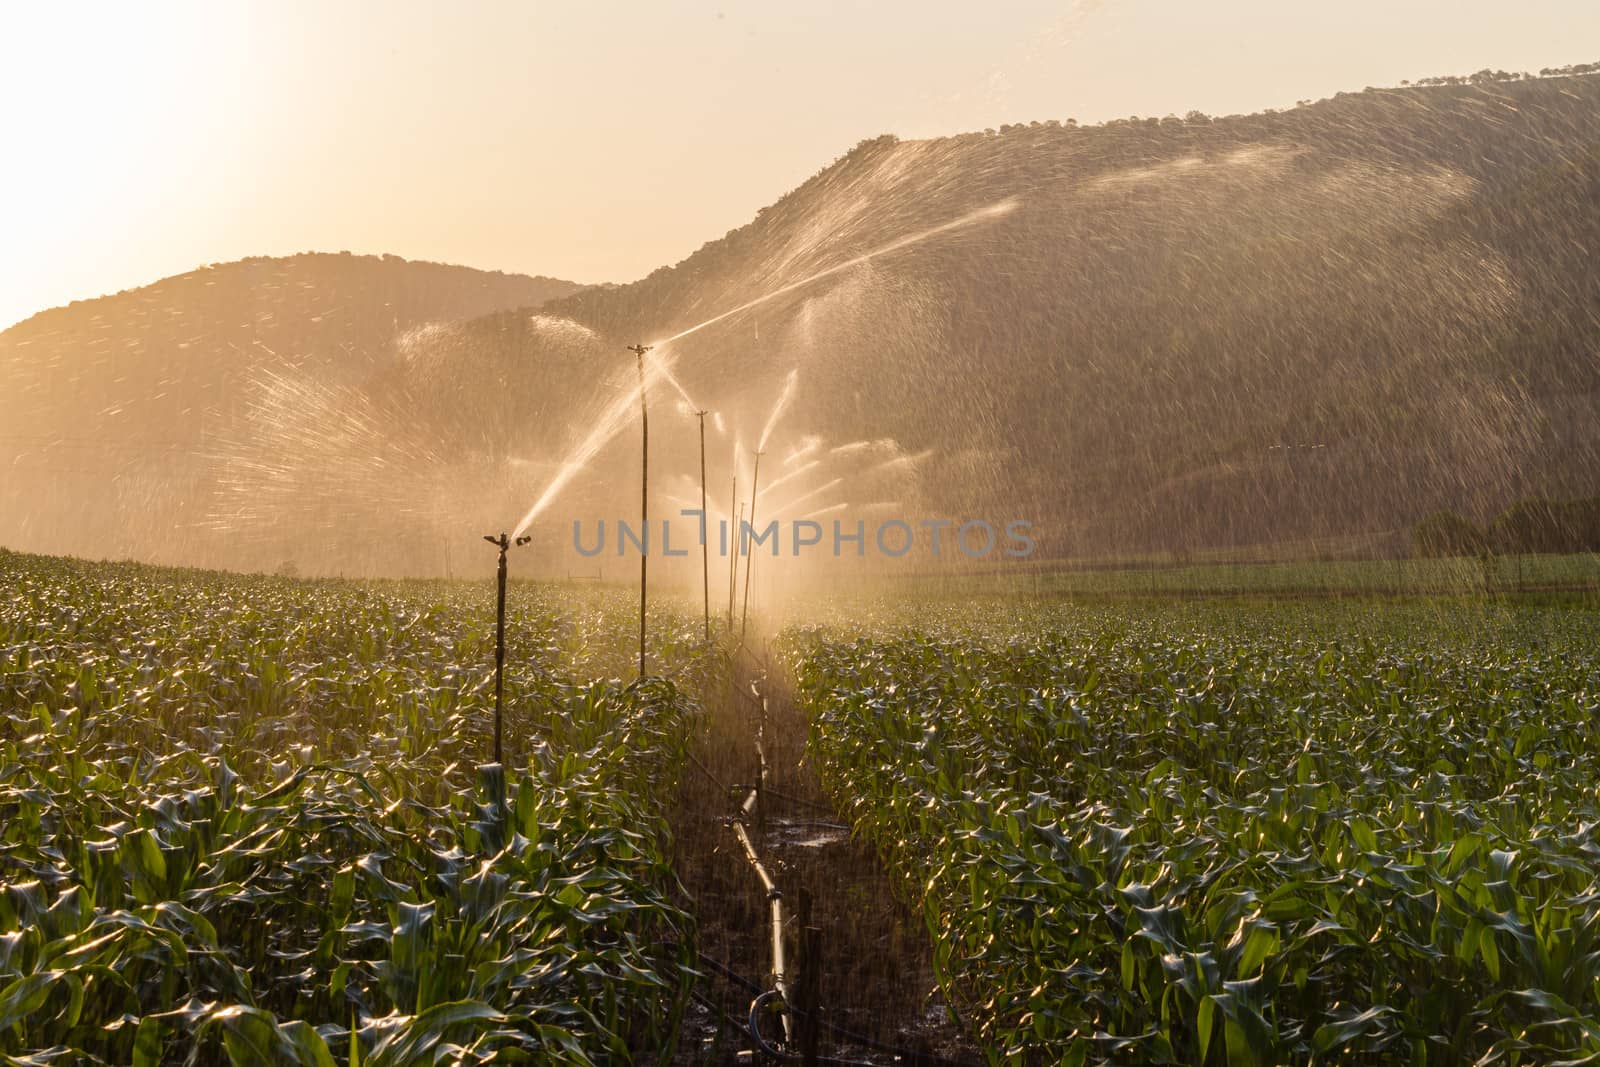 Food maize crop getting water from sprinklers at sunset